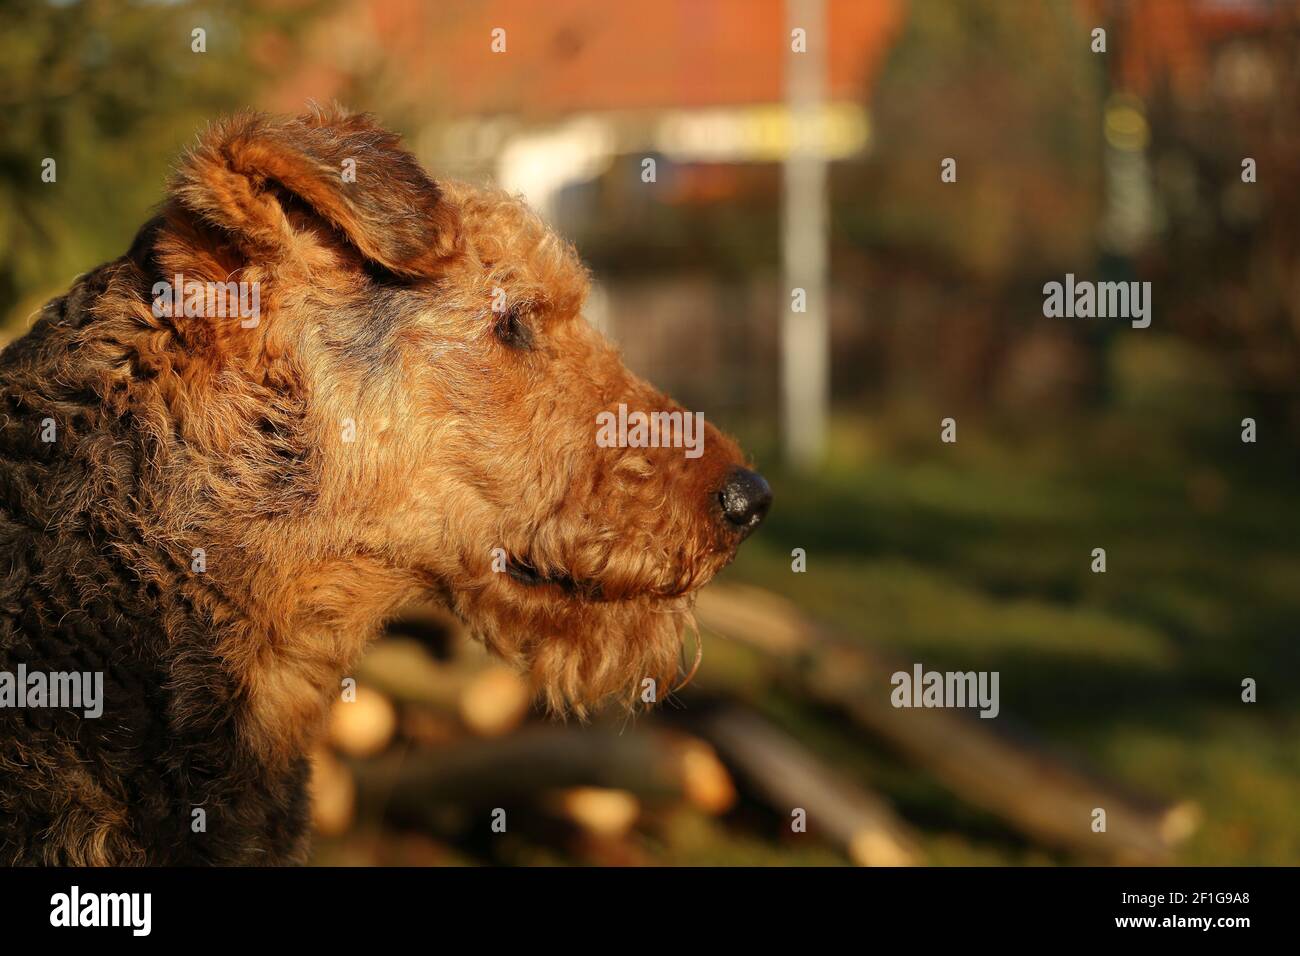 Dog glancing in the Distance Stock Photo